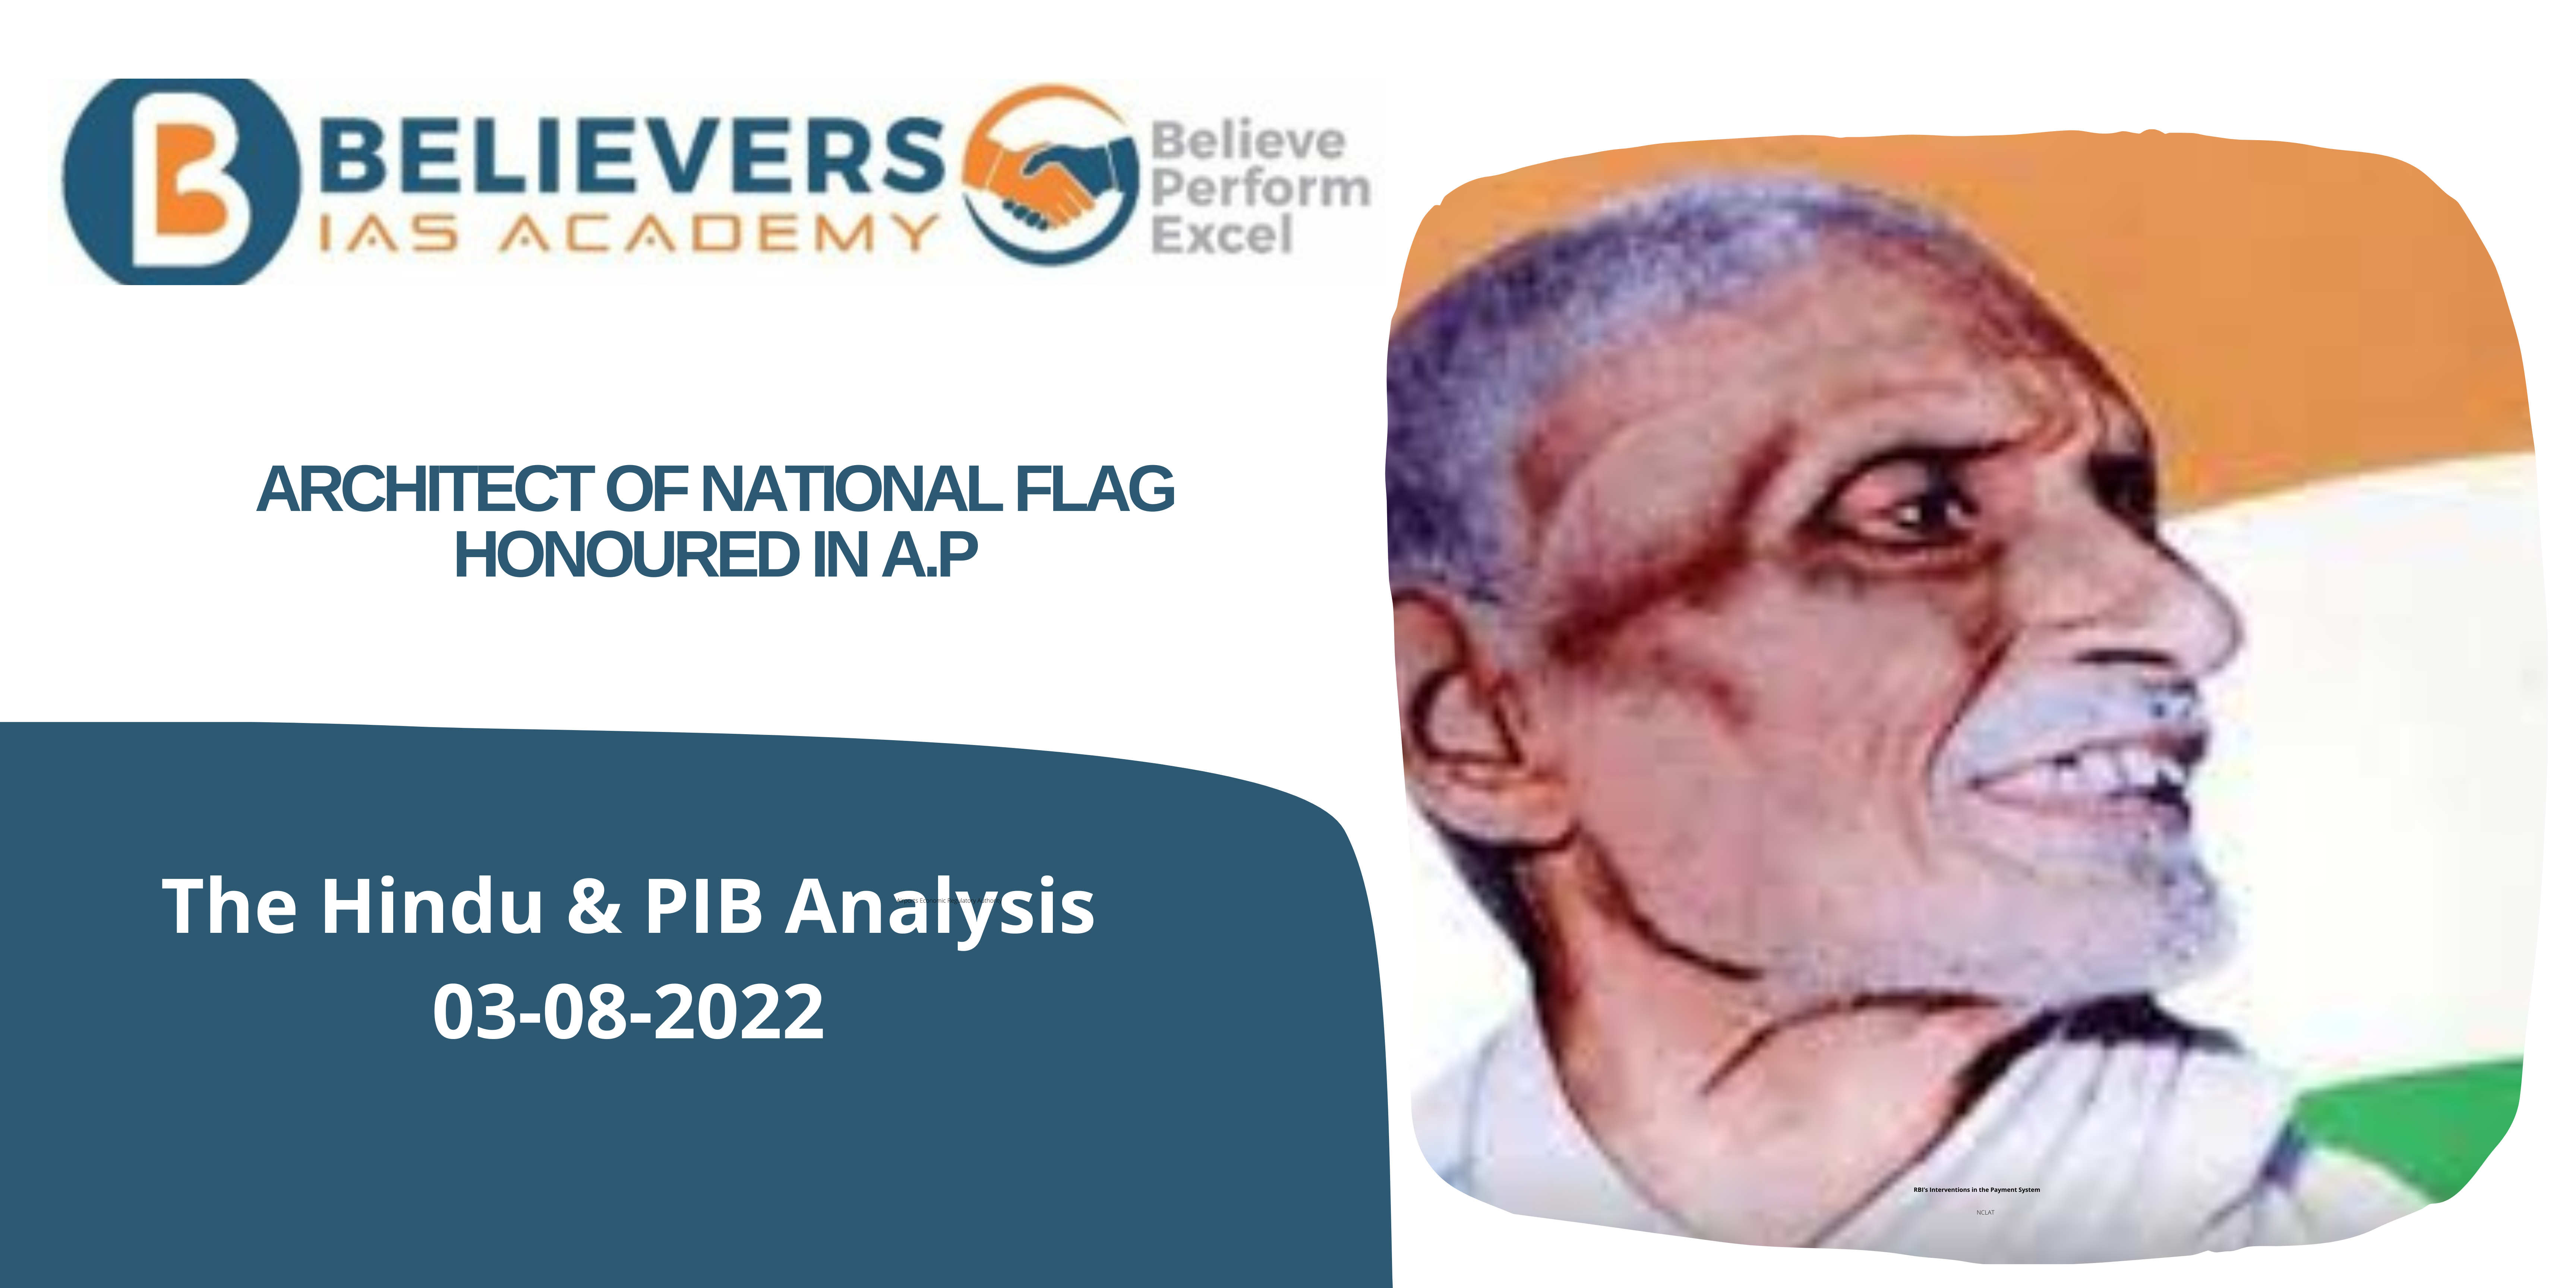 UPSC Current Affairs - Architect of National Flag Honoured in A.P